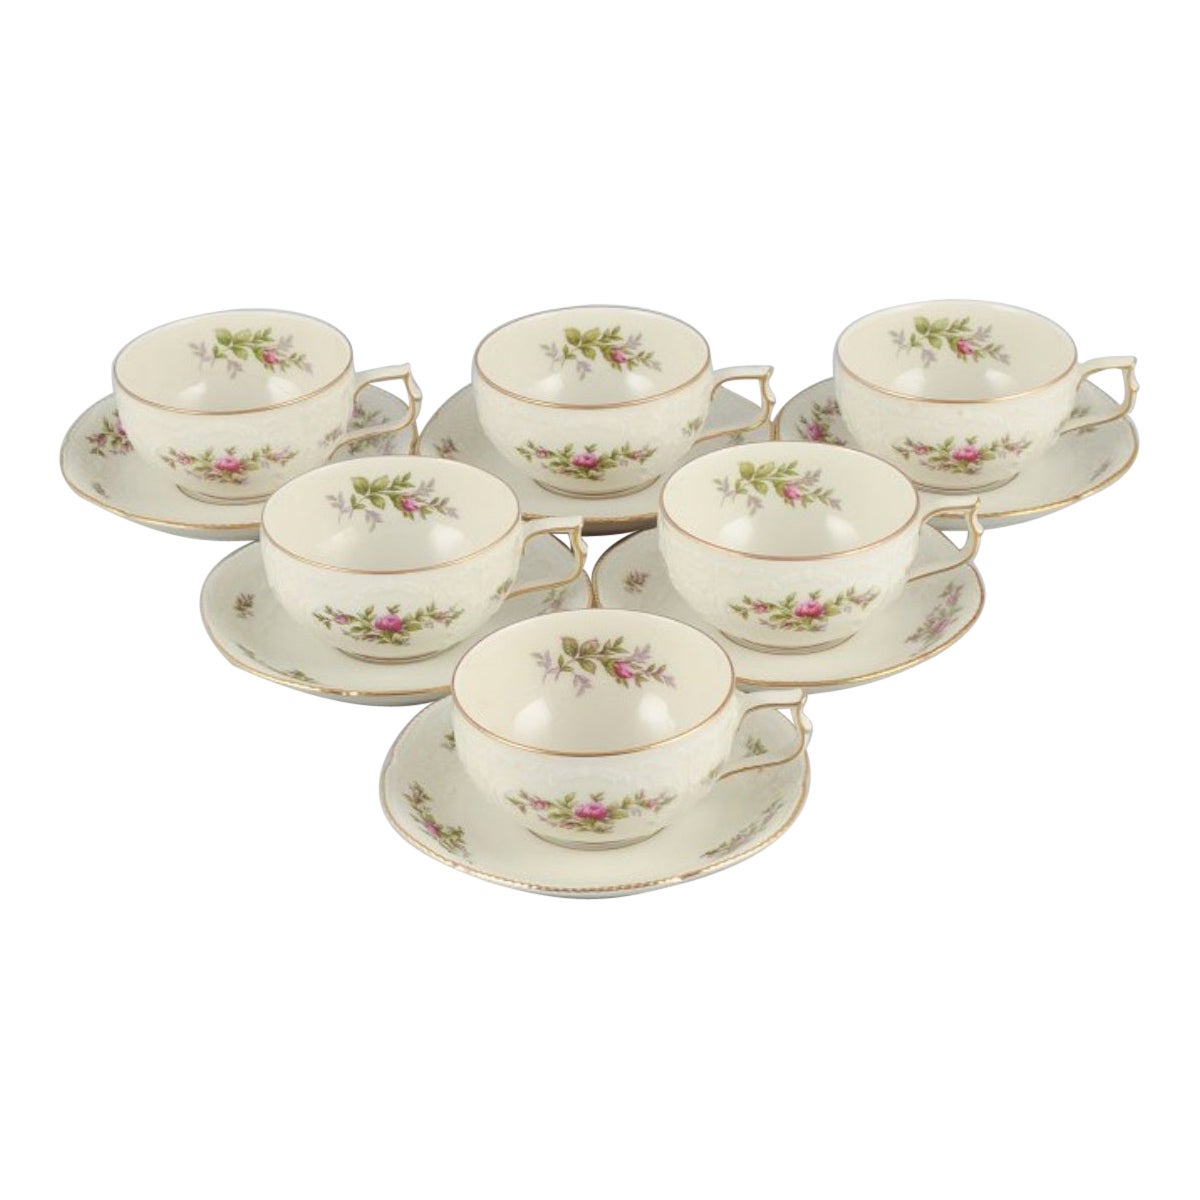 Rosenthal, Germany, "Sanssouci", Six Cream-Colored Teacups with Saucers